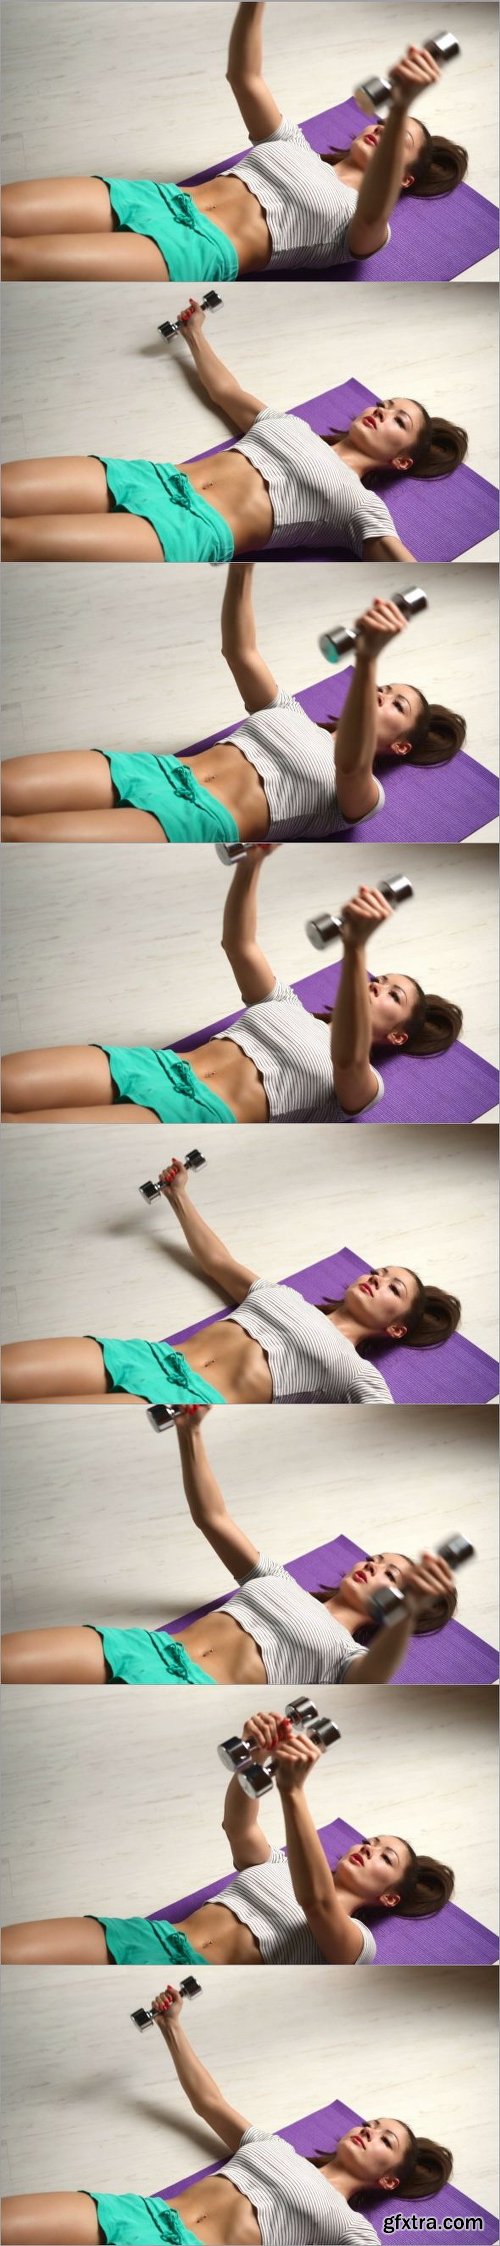 Girl Pumping Muscles With Dumbbells